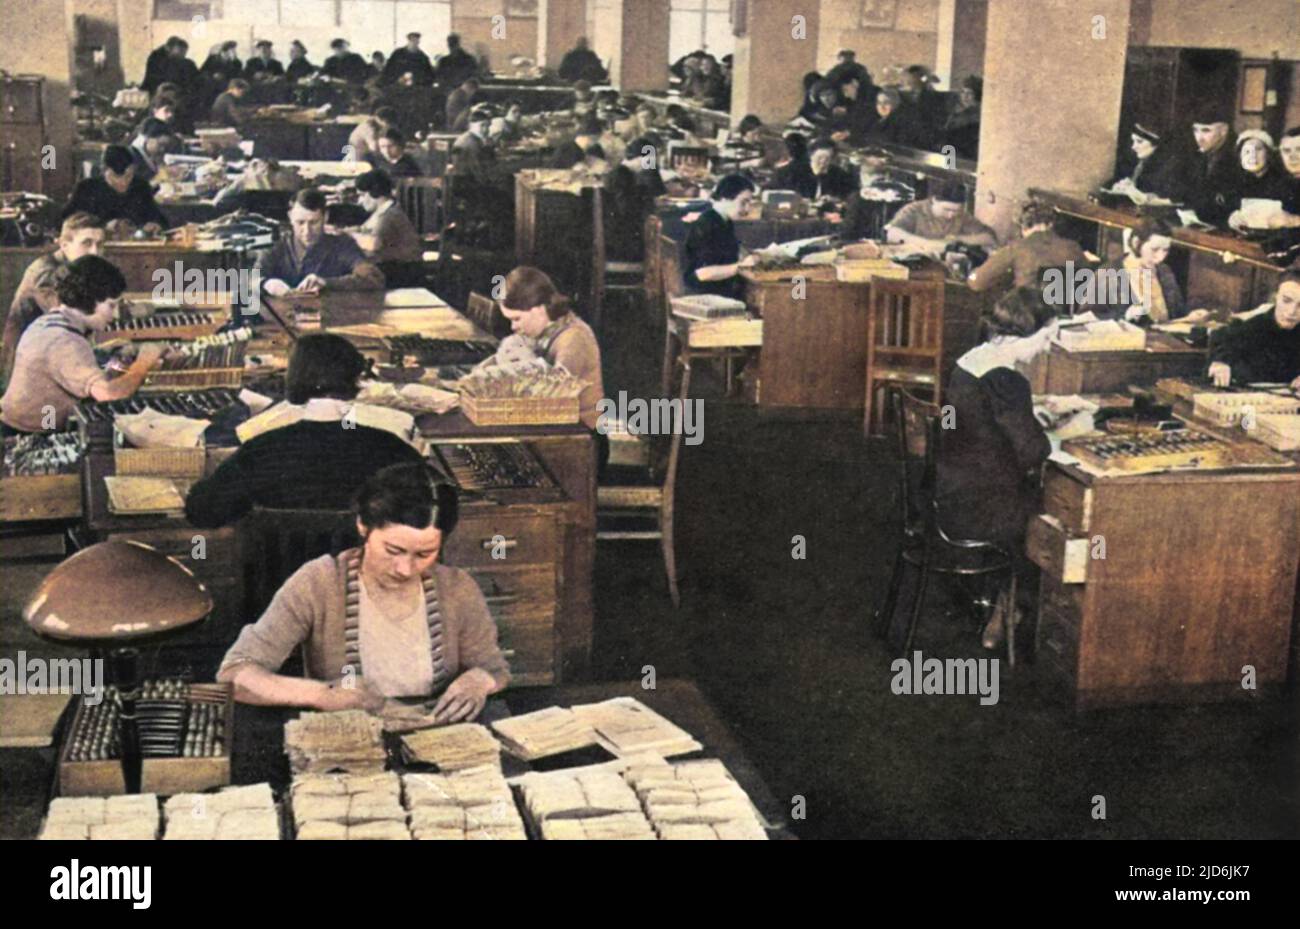 Registering the deposits of Soviet workers in the State Bank of the U.S.S.R in 1939.  On the right, depositors can be seen at a counter waiting their turn while men and women clerks are busily engaged in banking work. Colourised version of: 10582993       Date: 1939 Stock Photo